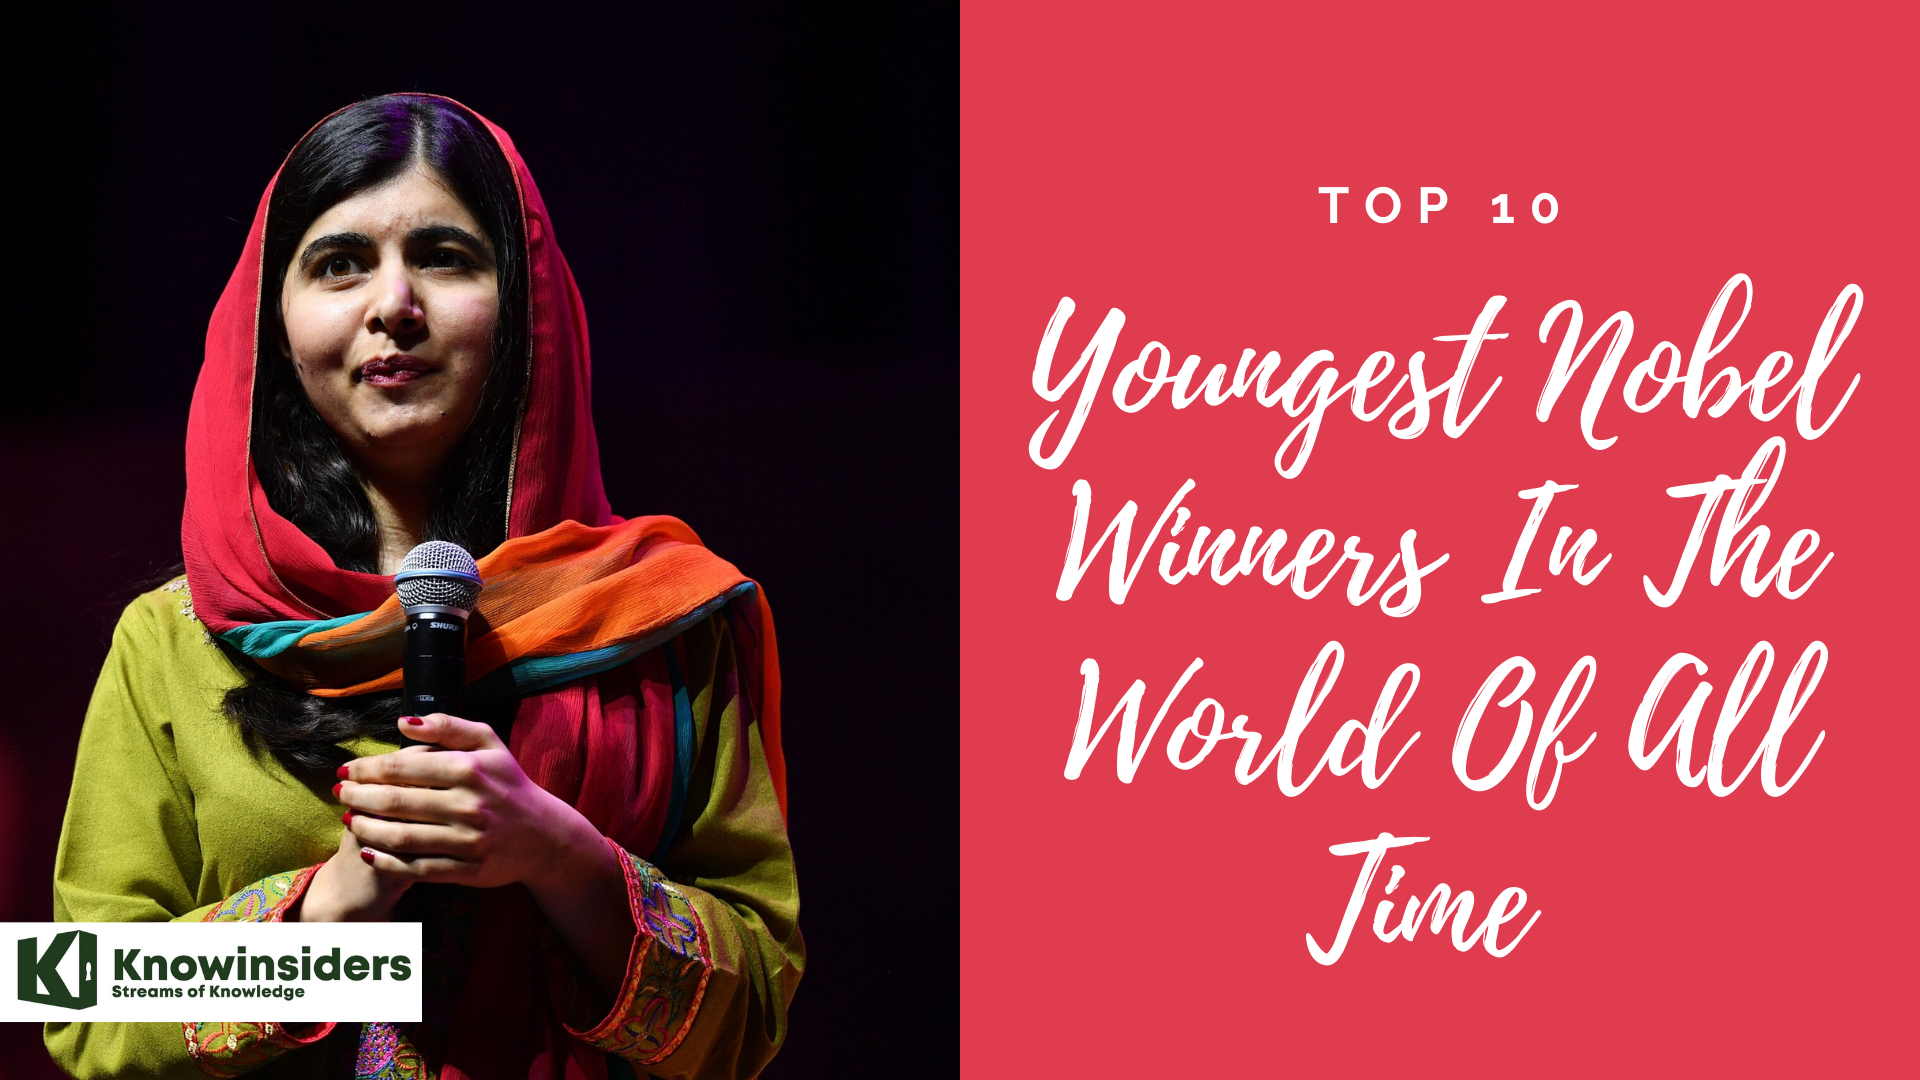 Top 10 Youngest Nobel Winners in the World of All Time